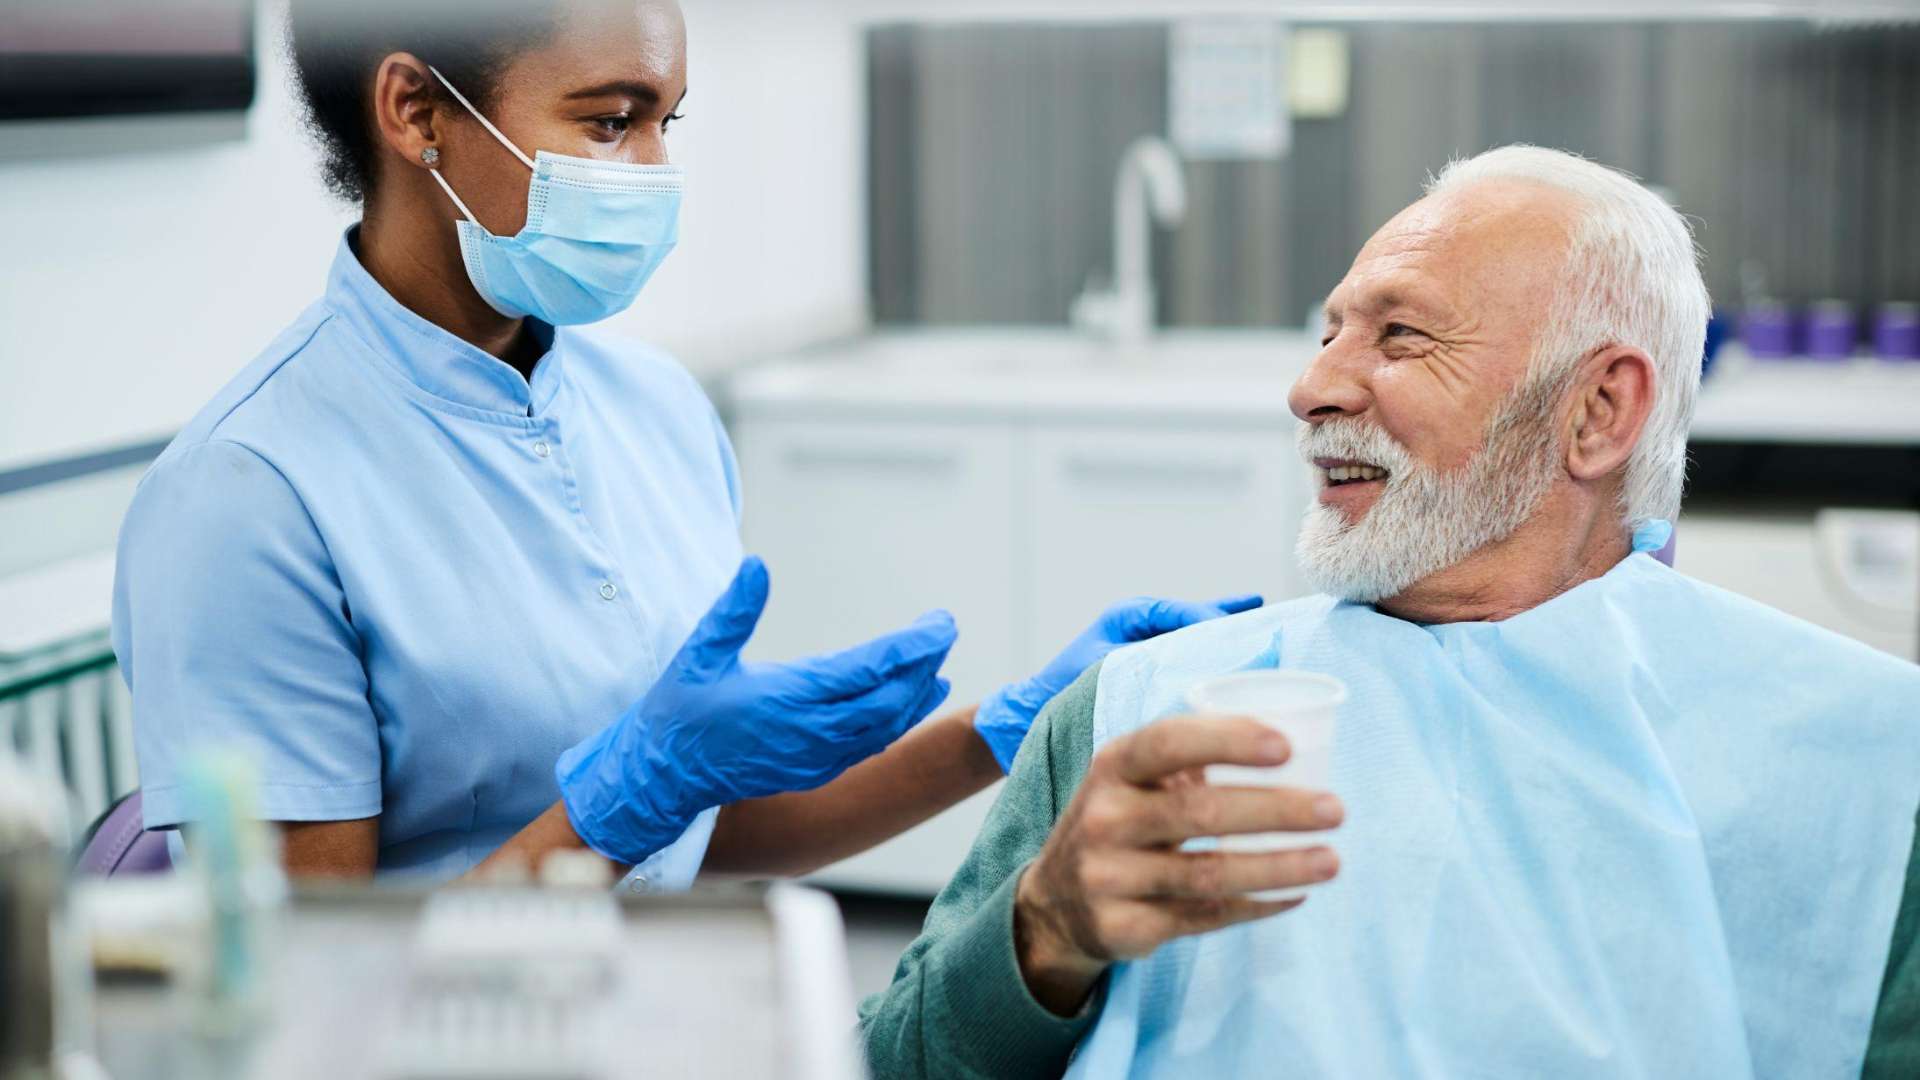 What is involved in Sedation Dentistry?